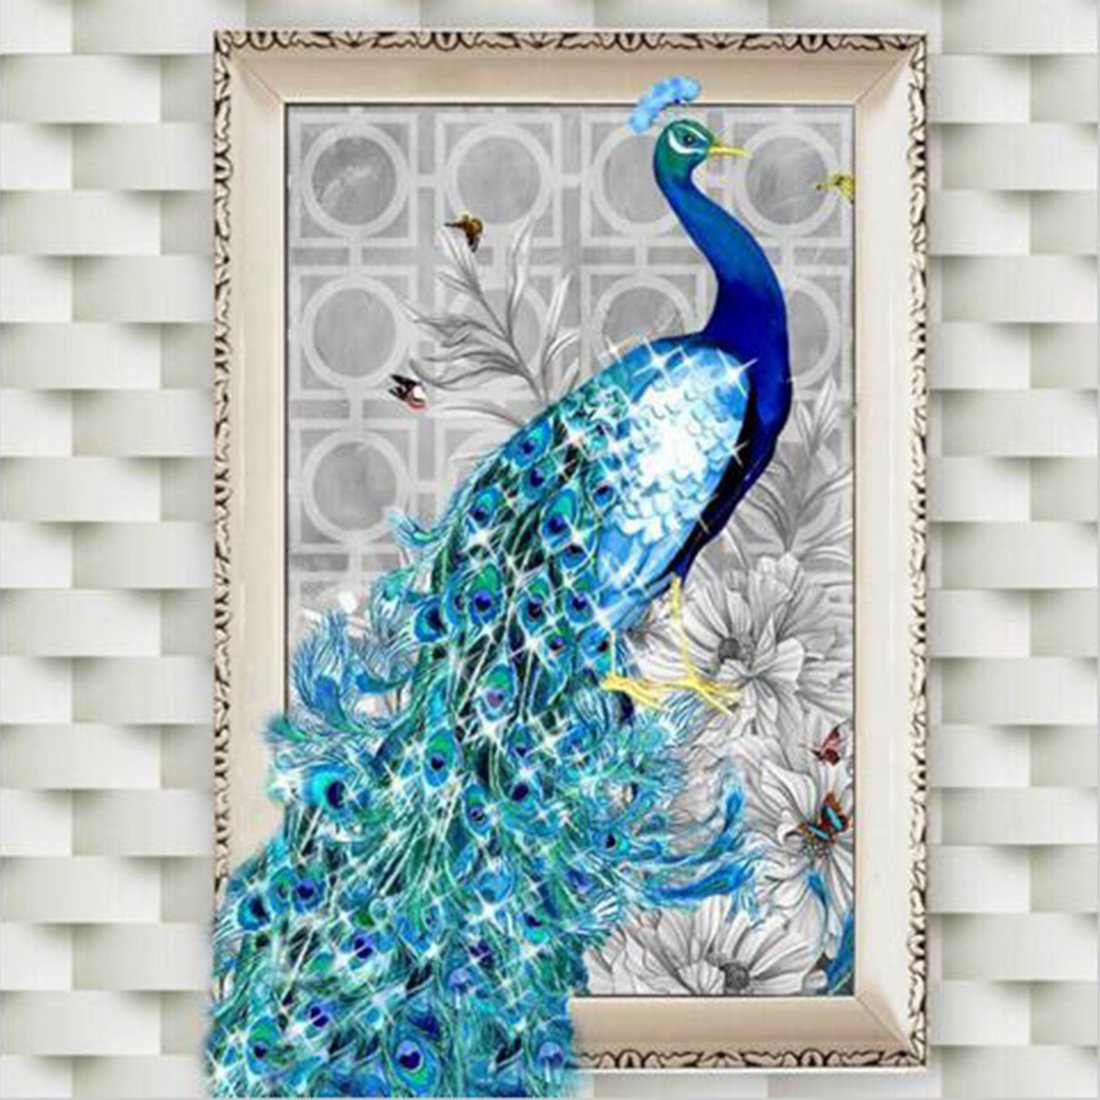 Peacock Embroidery Patterns Free Embroidery Patterns With Peacocks Free Embroidery Patterns